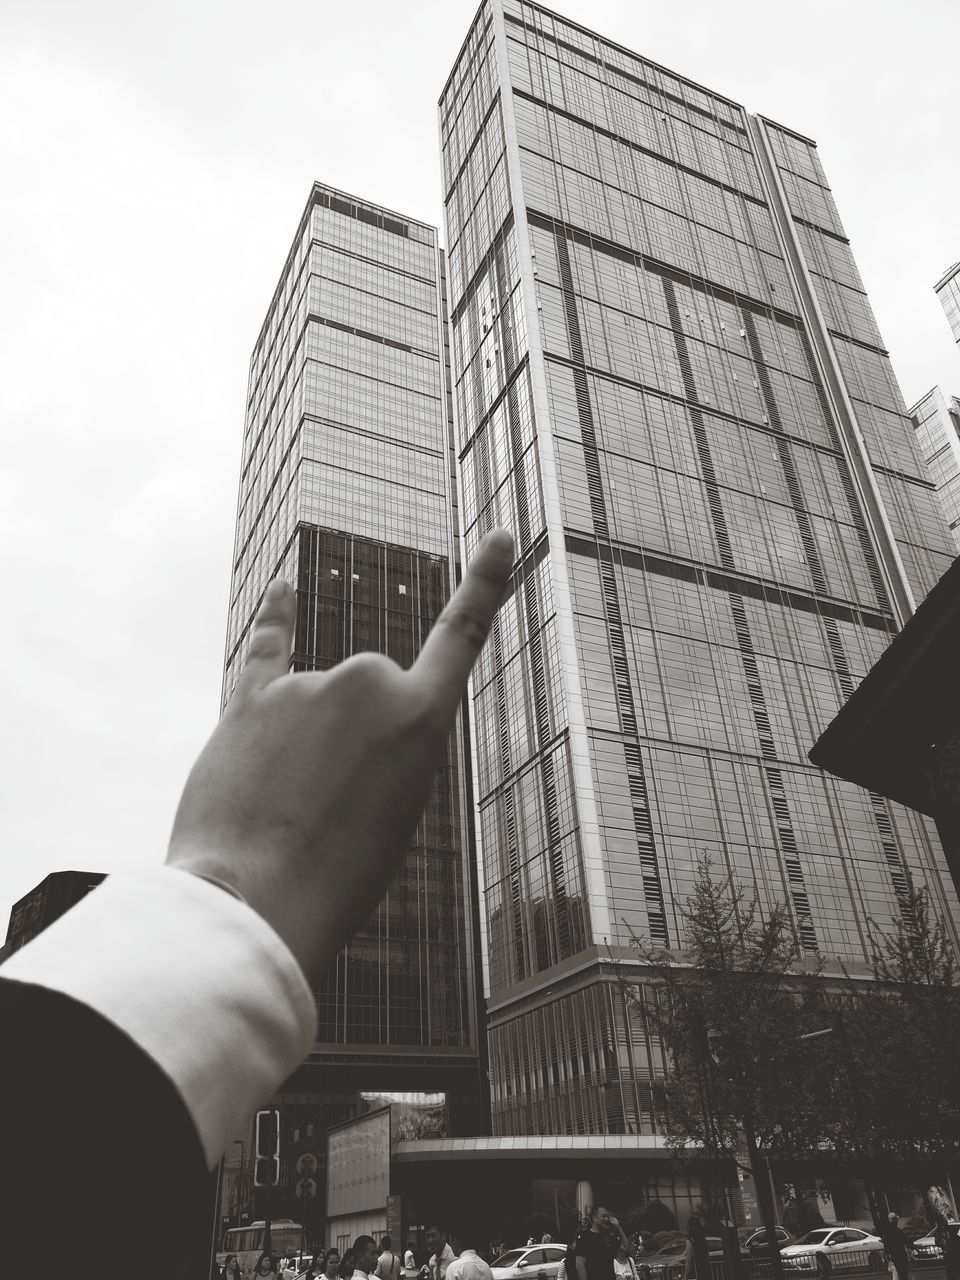 human hand, architecture, building exterior, human body part, skyscraper, city, built structure, human finger, one person, personal perspective, sky, real people, urban skyline, day, outdoors, modern, business finance and industry, cityscape, people, adult, adults only